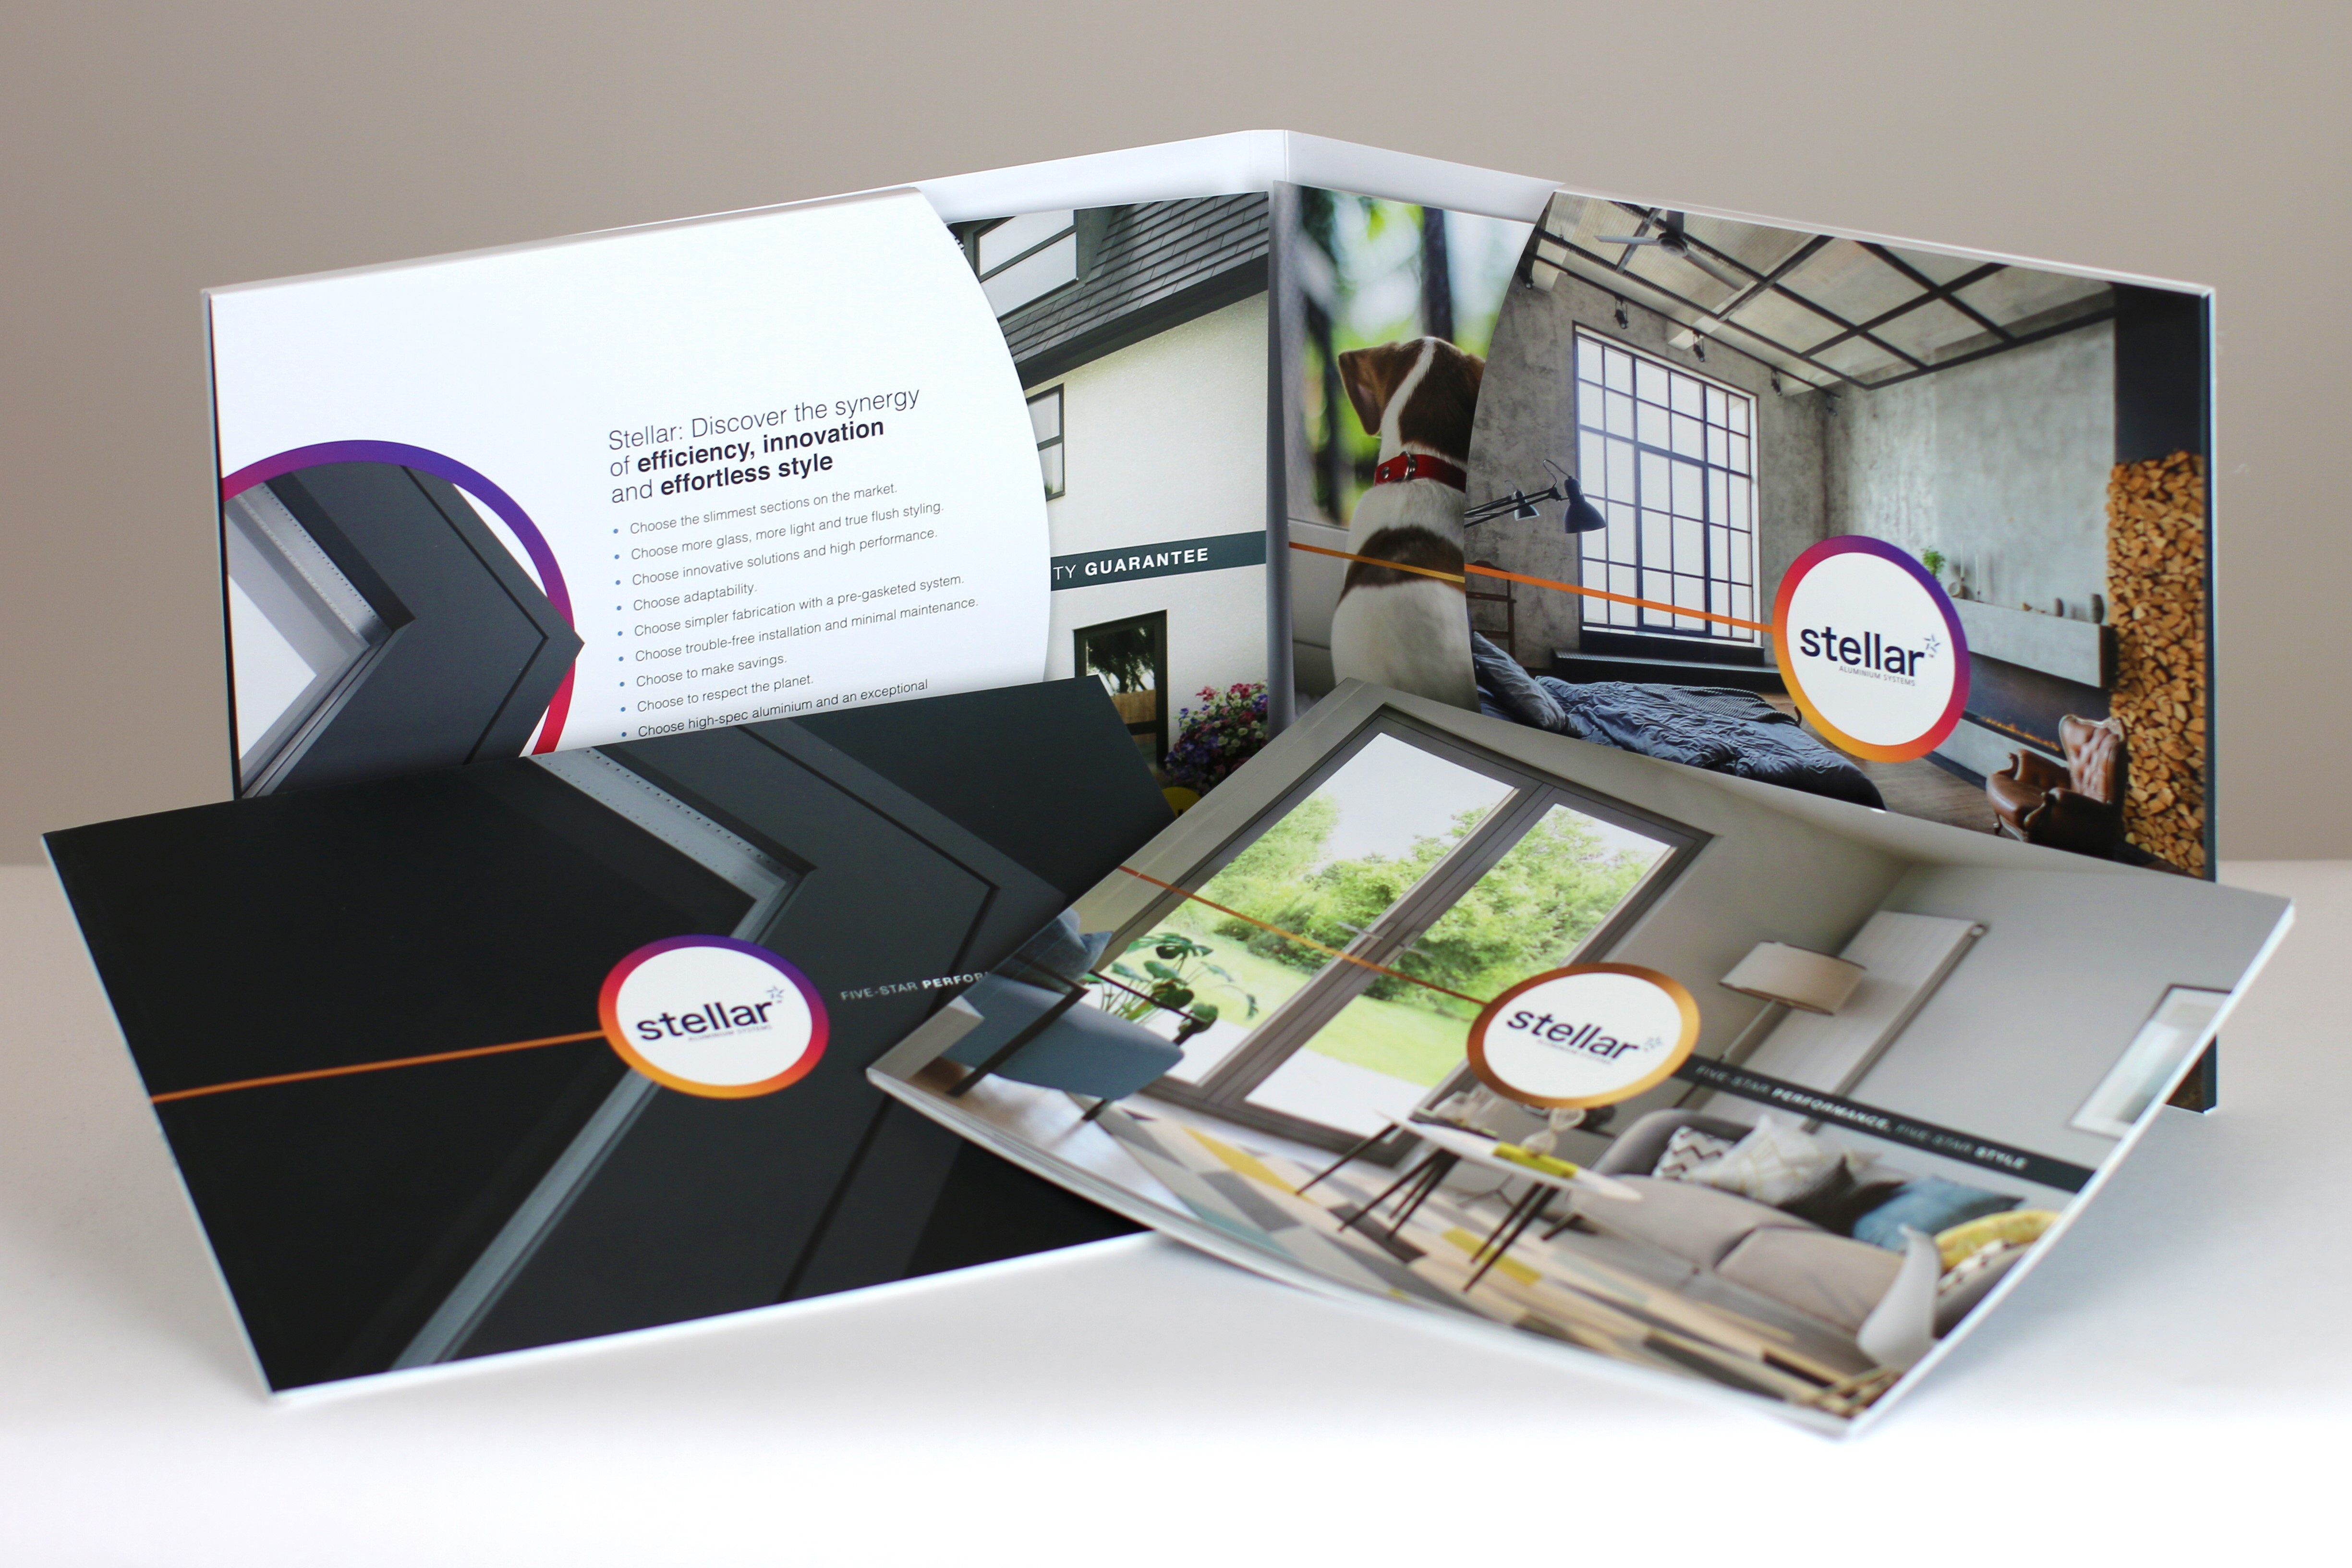 Epwin Window Systems releases Stellar marketing material